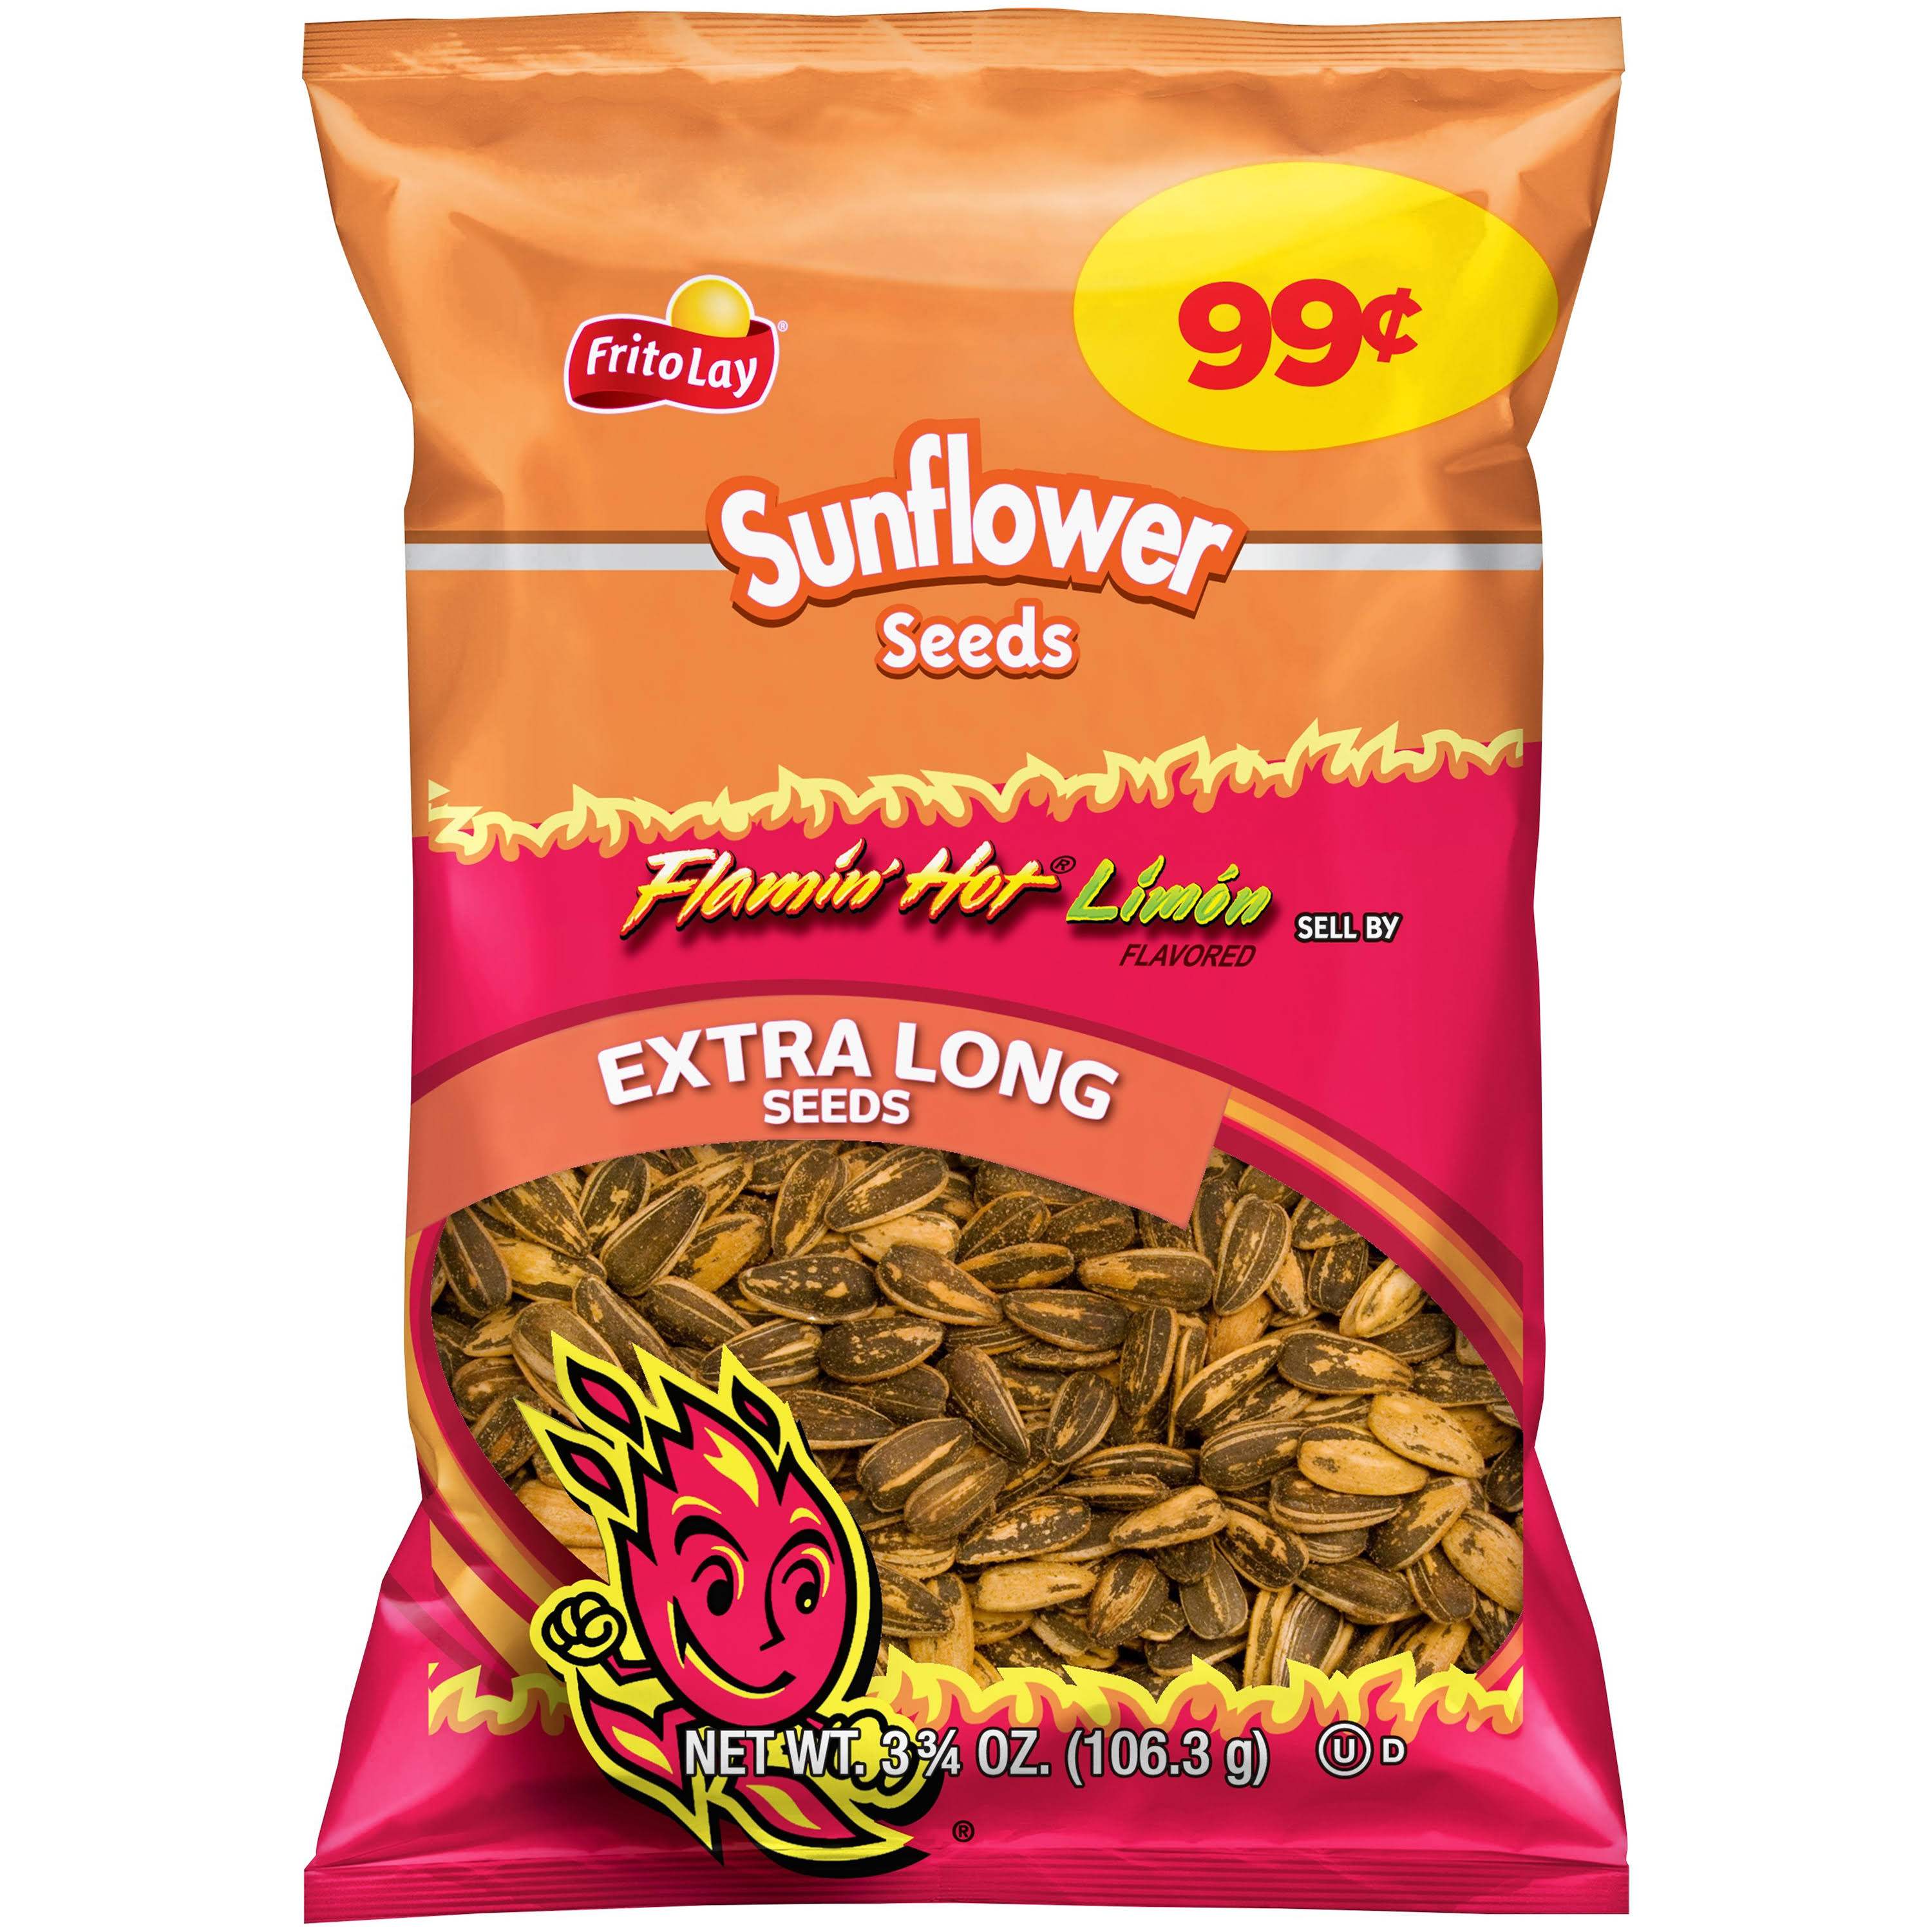 Frito Lay Sunflower Seeds - Flamin' Hot, Limon, Extra Long